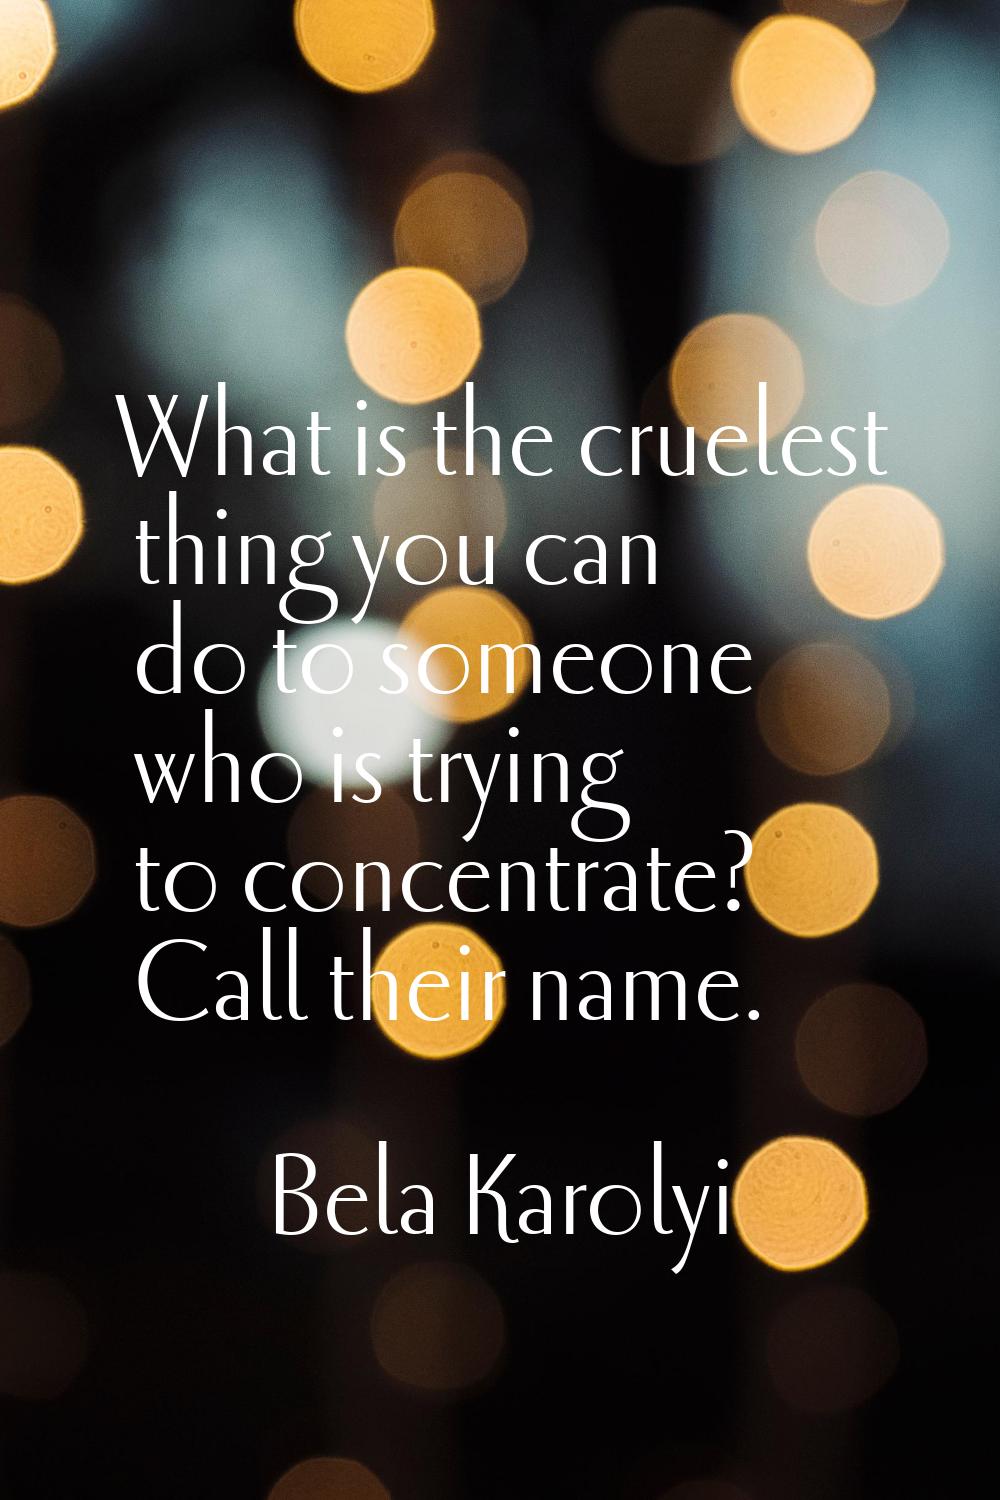 What is the cruelest thing you can do to someone who is trying to concentrate? Call their name.